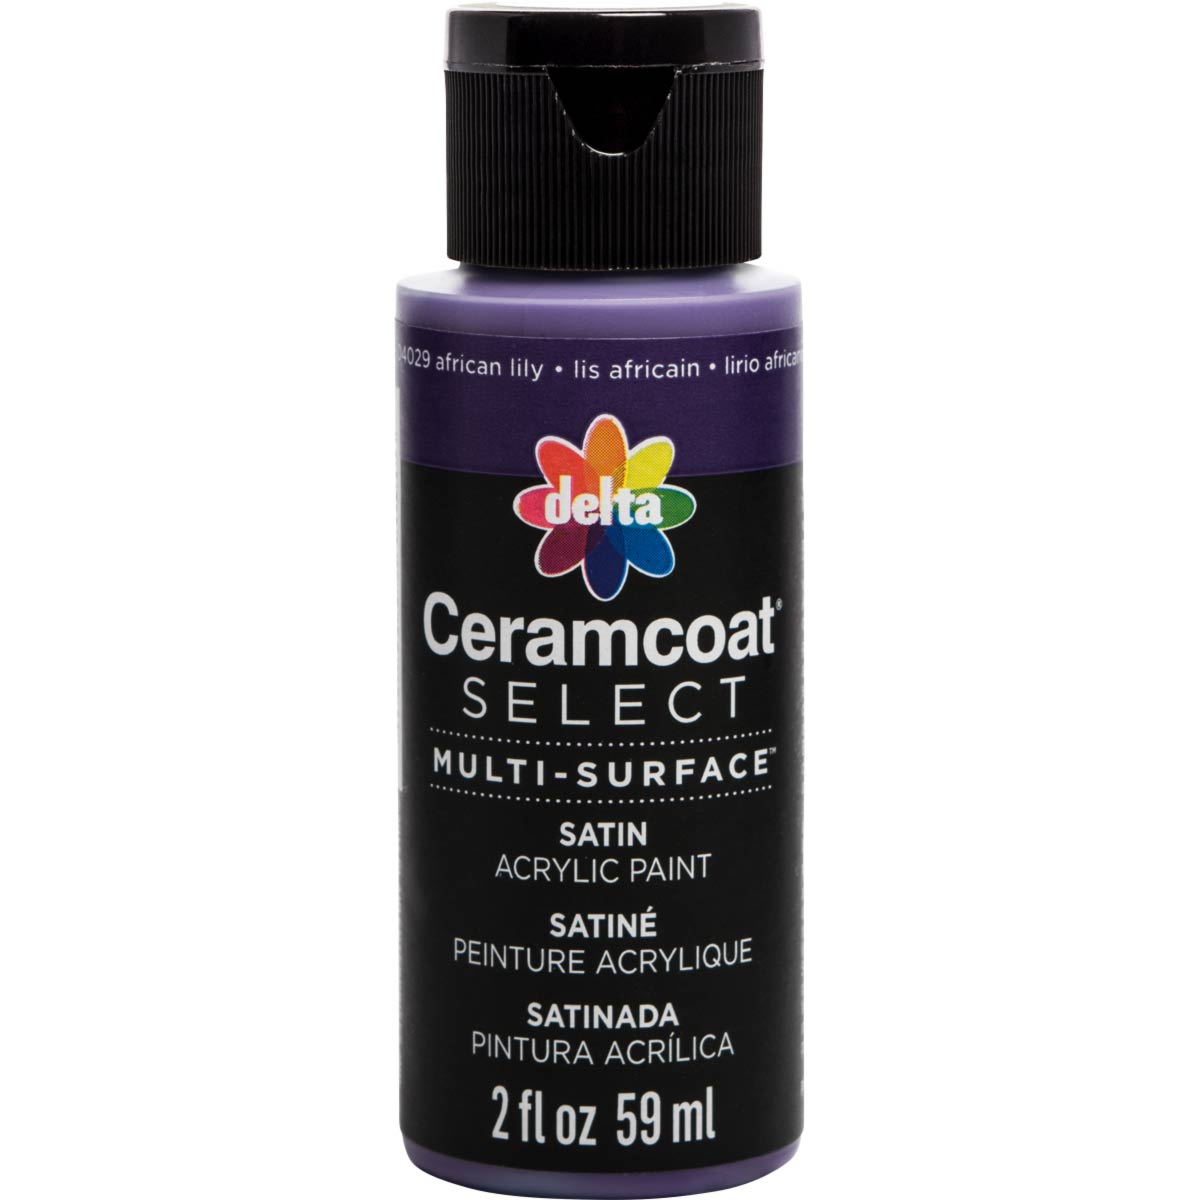 Delta Ceramcoat ® Select Multi-Surface Acrylic Paint - Satin - African Lily, 2 oz. - 04029